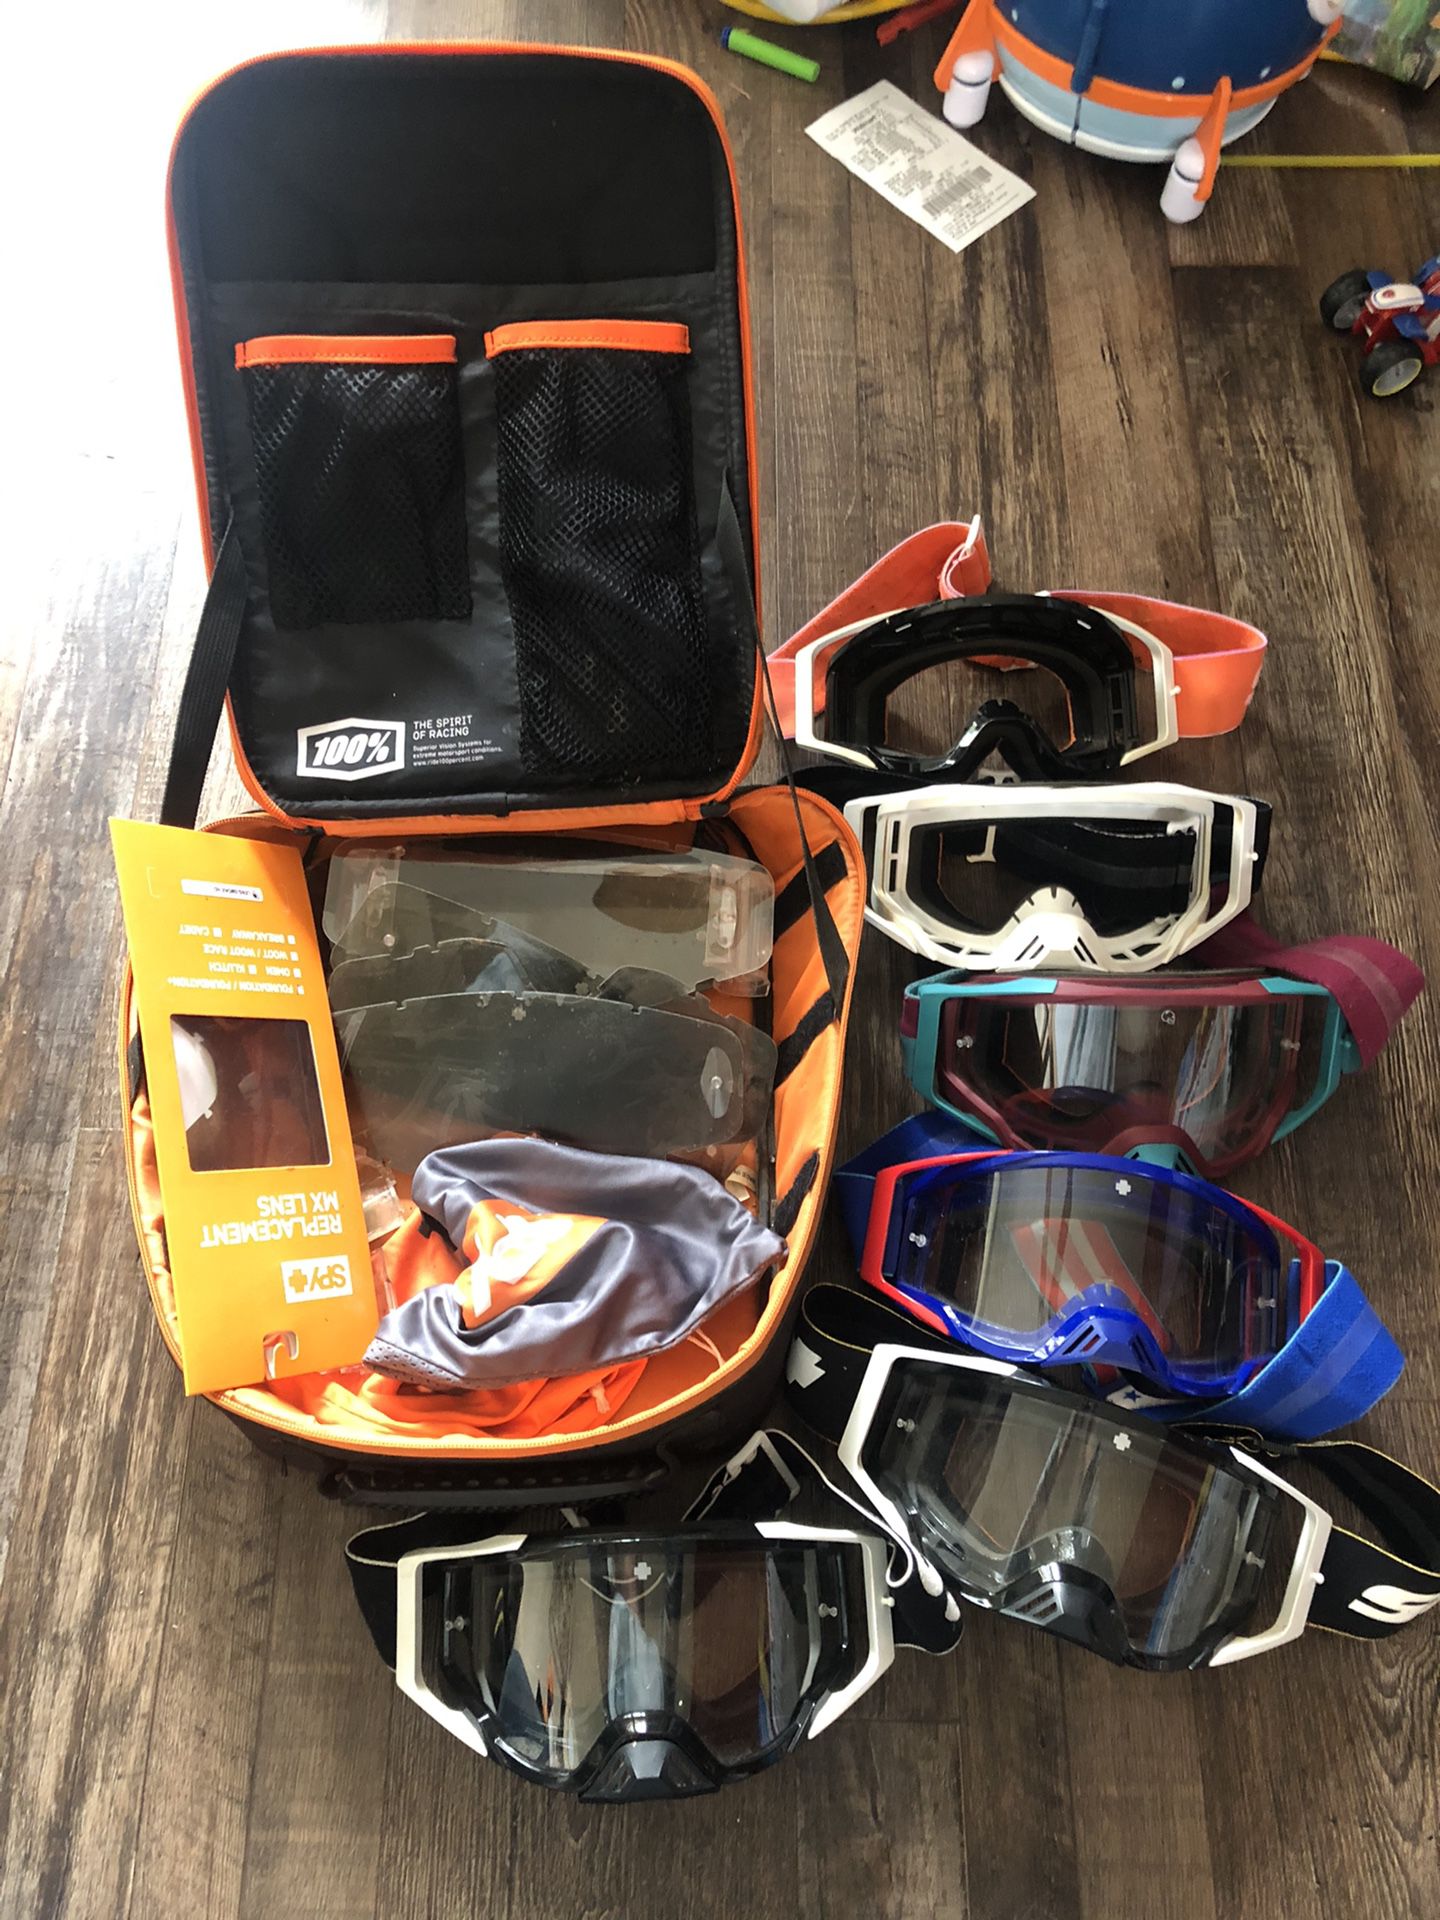 6 Pairs Of Riding/Boarding Googles, Replacement Lenses And Bag